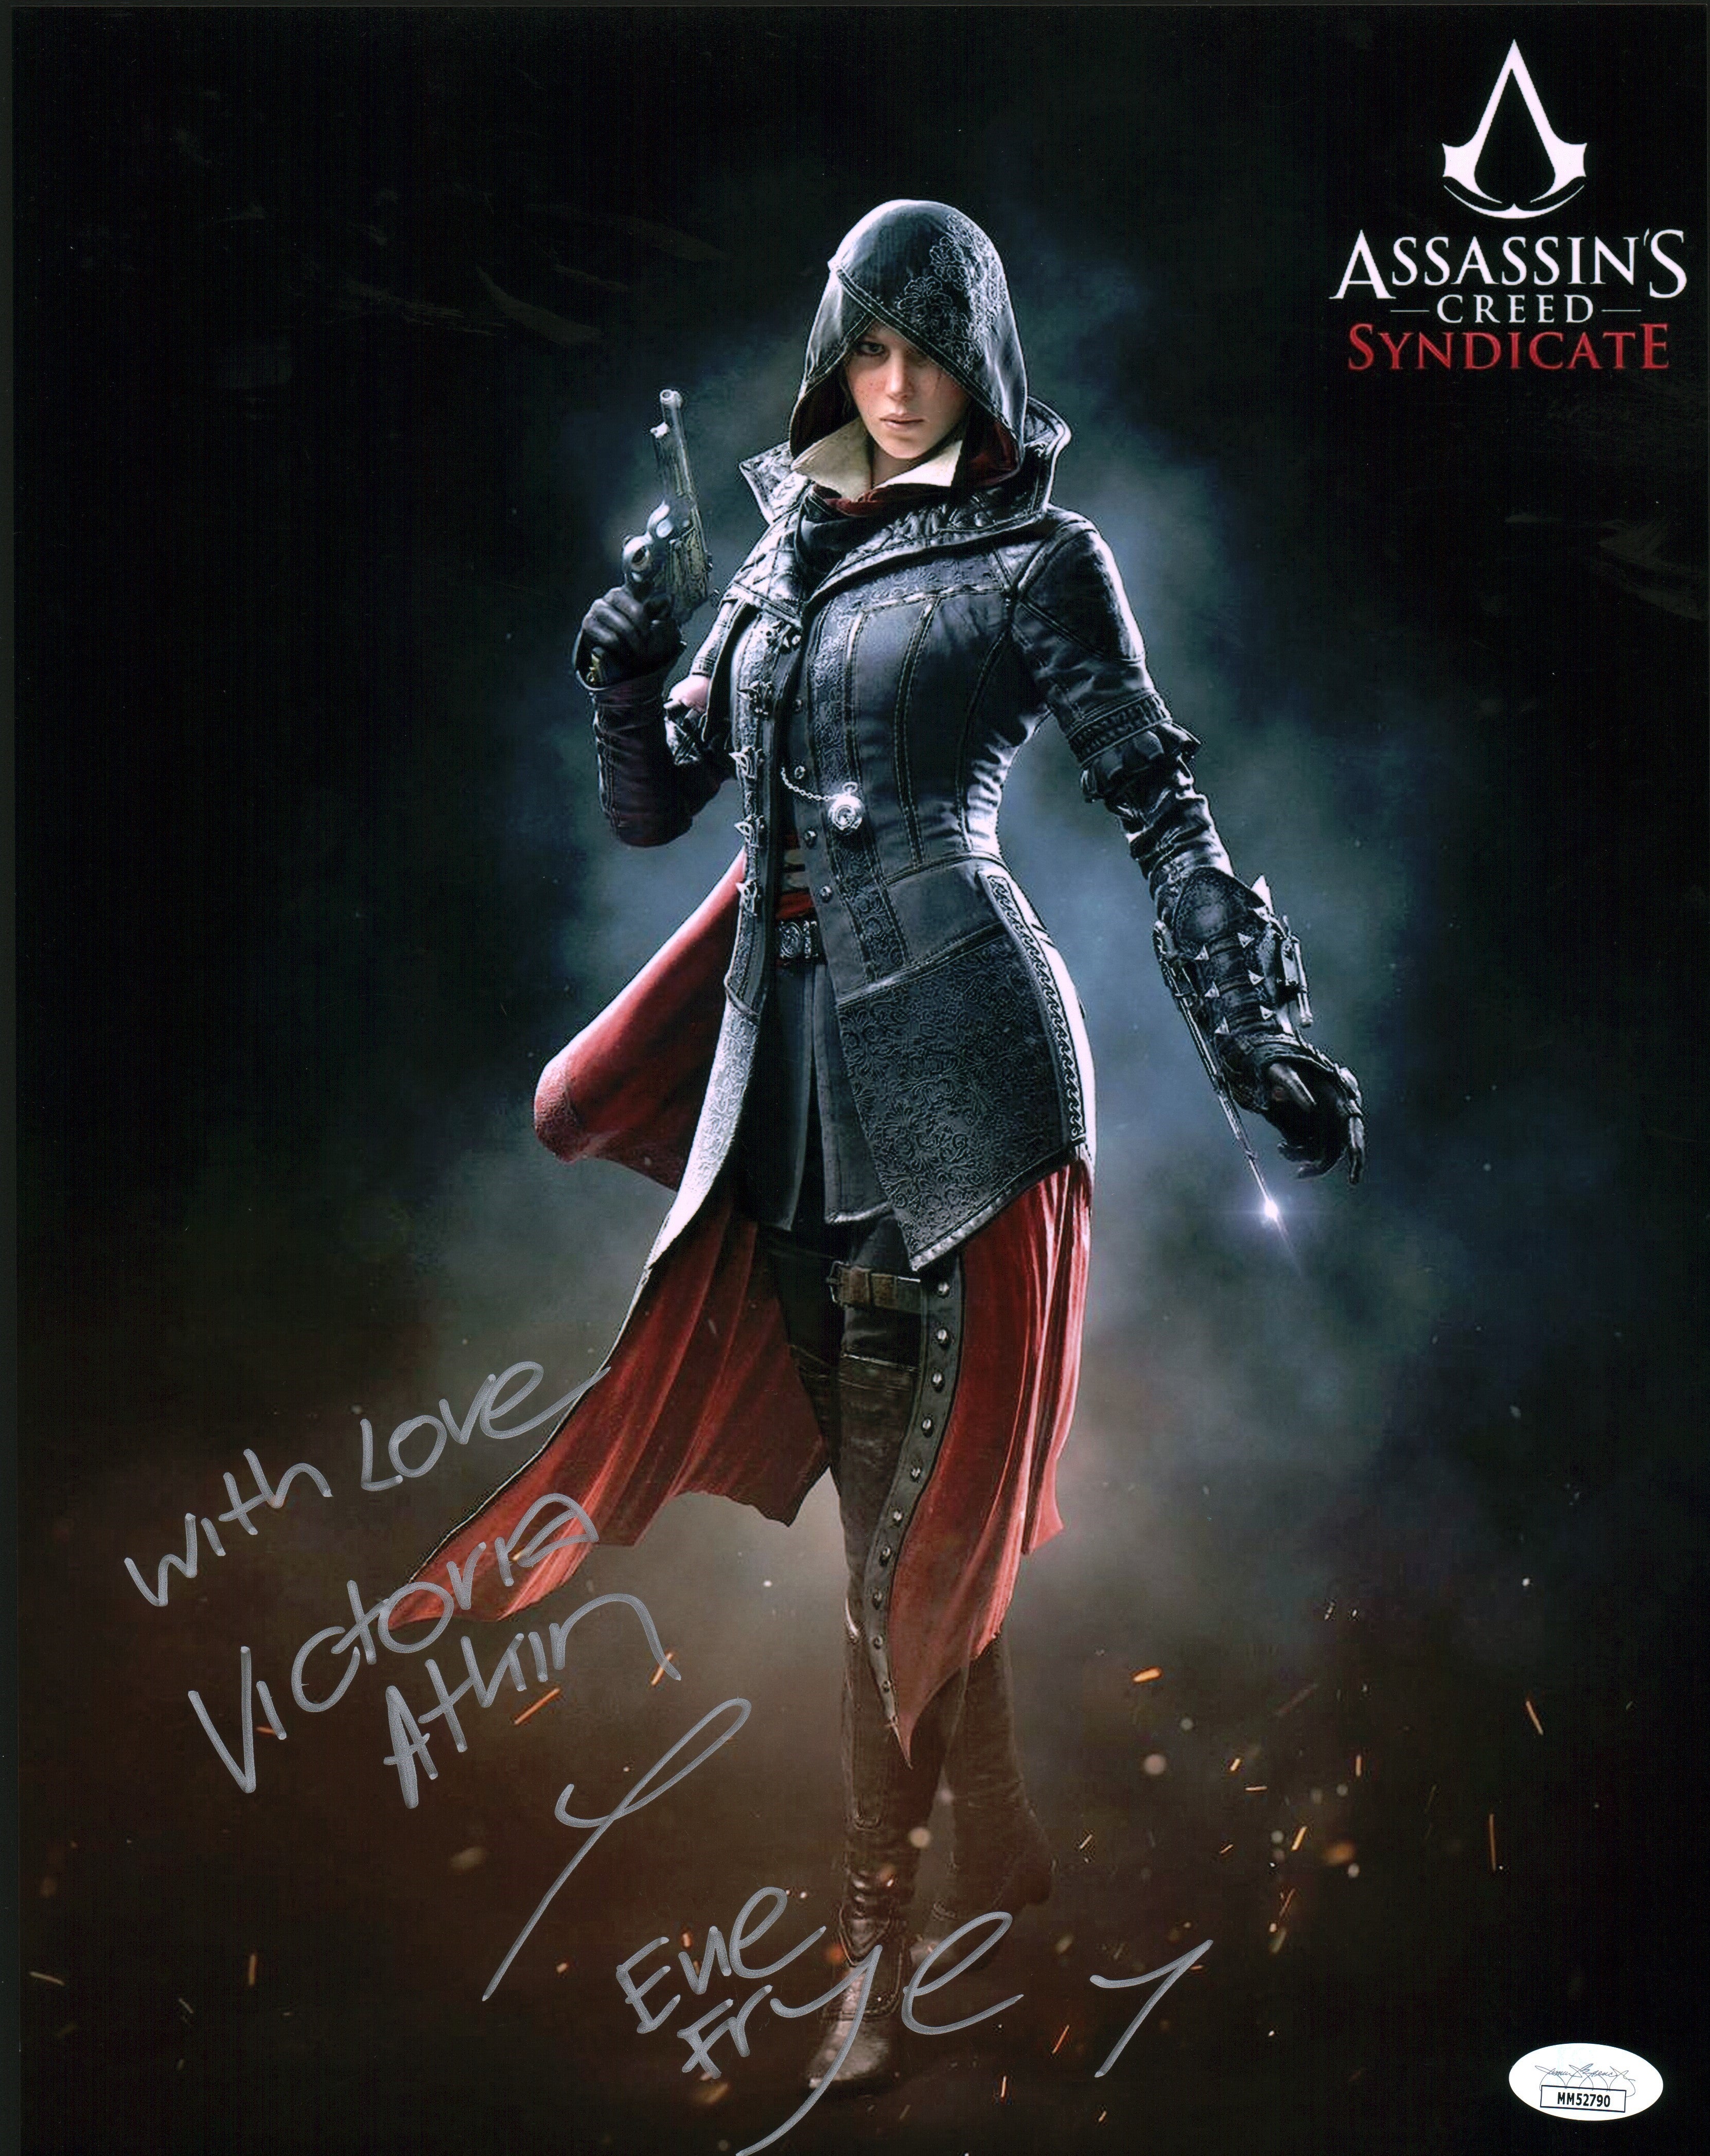 Victoria Atkin Assassin's Creed Syndicate 11x14 Photo Poster Signed Autograph JSA Certified COA Auto